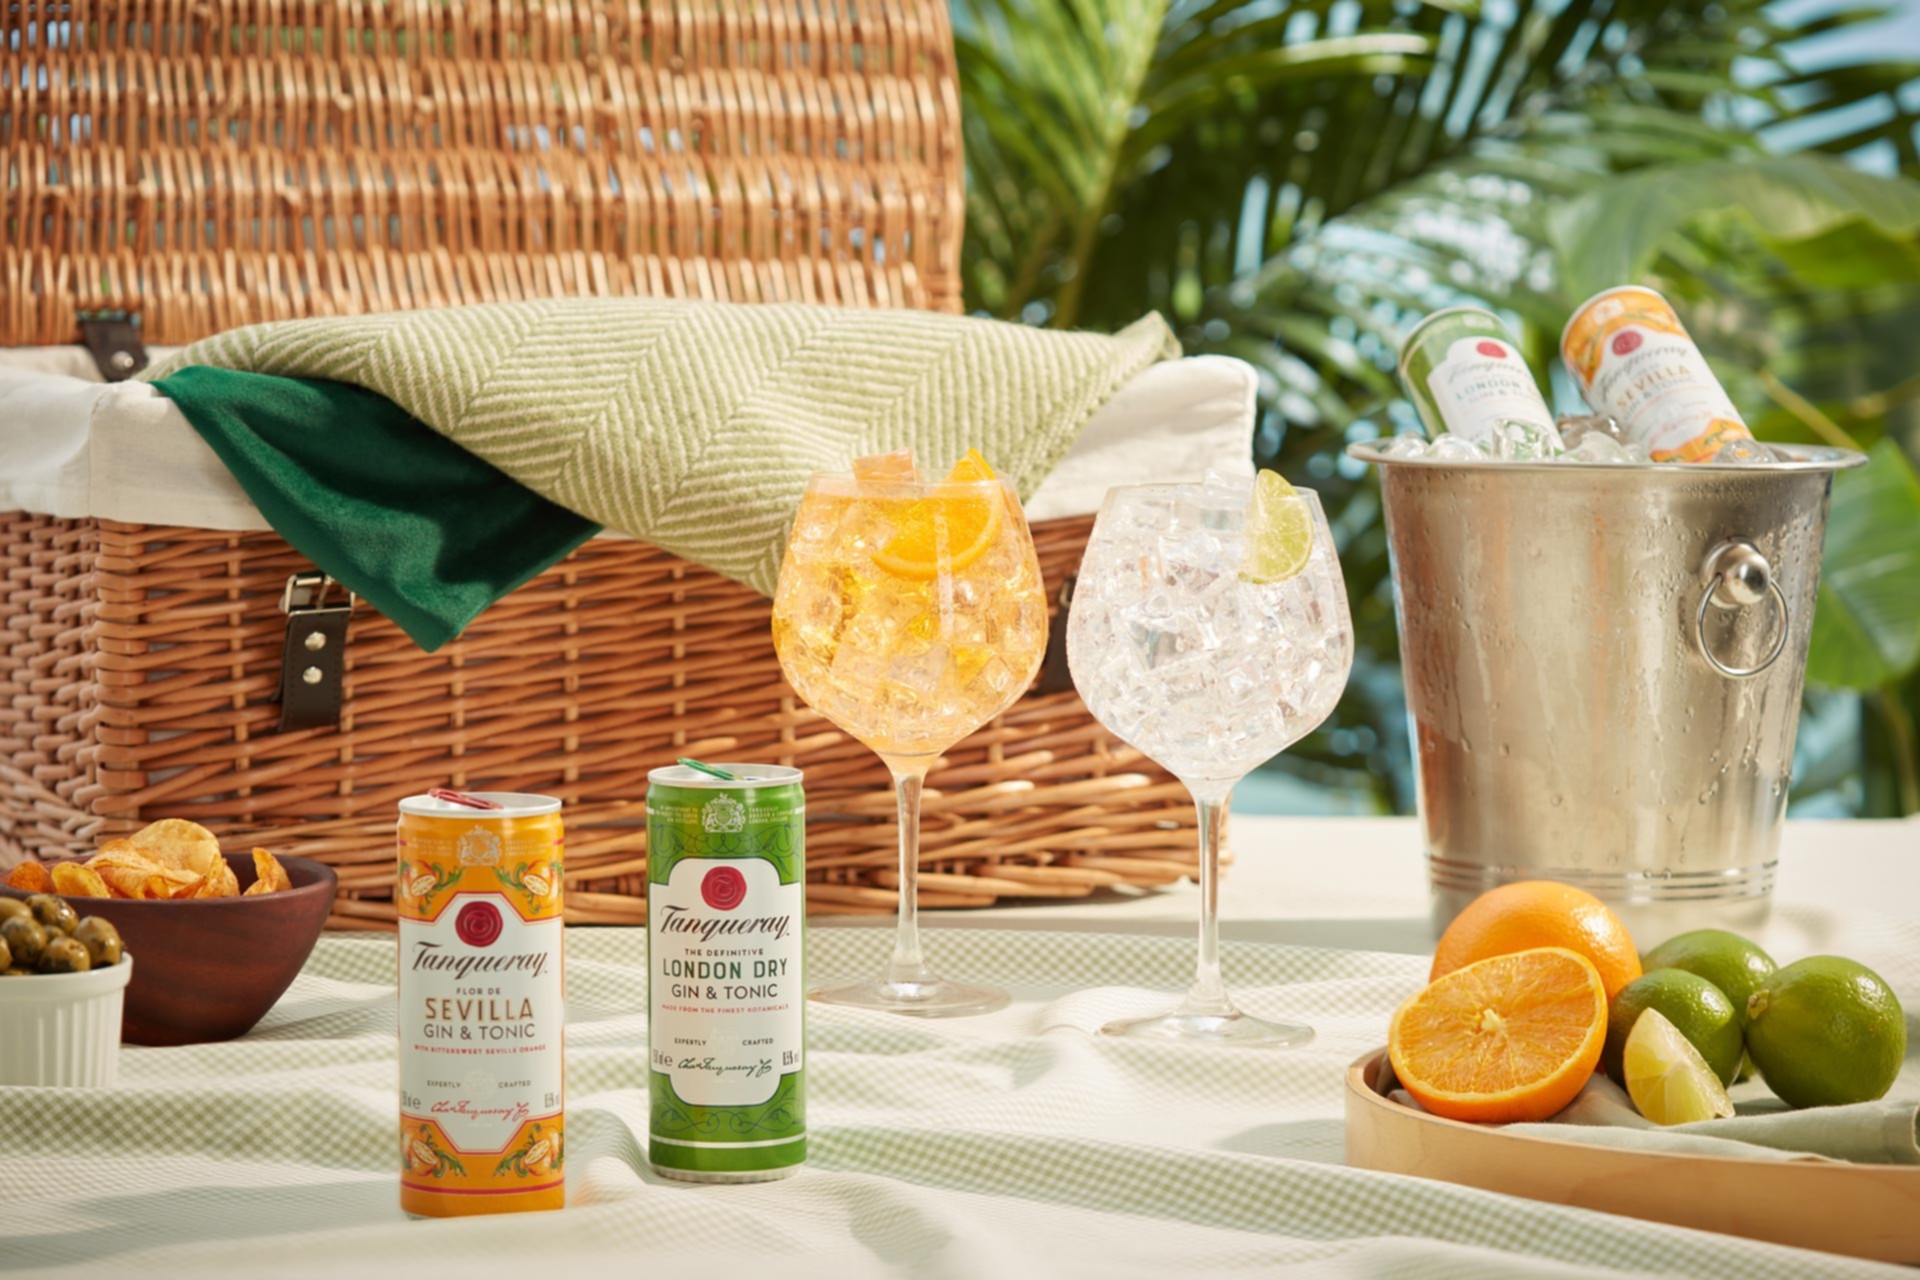 Tanqueray-ready-to-drink-picnic_1920px.jpg